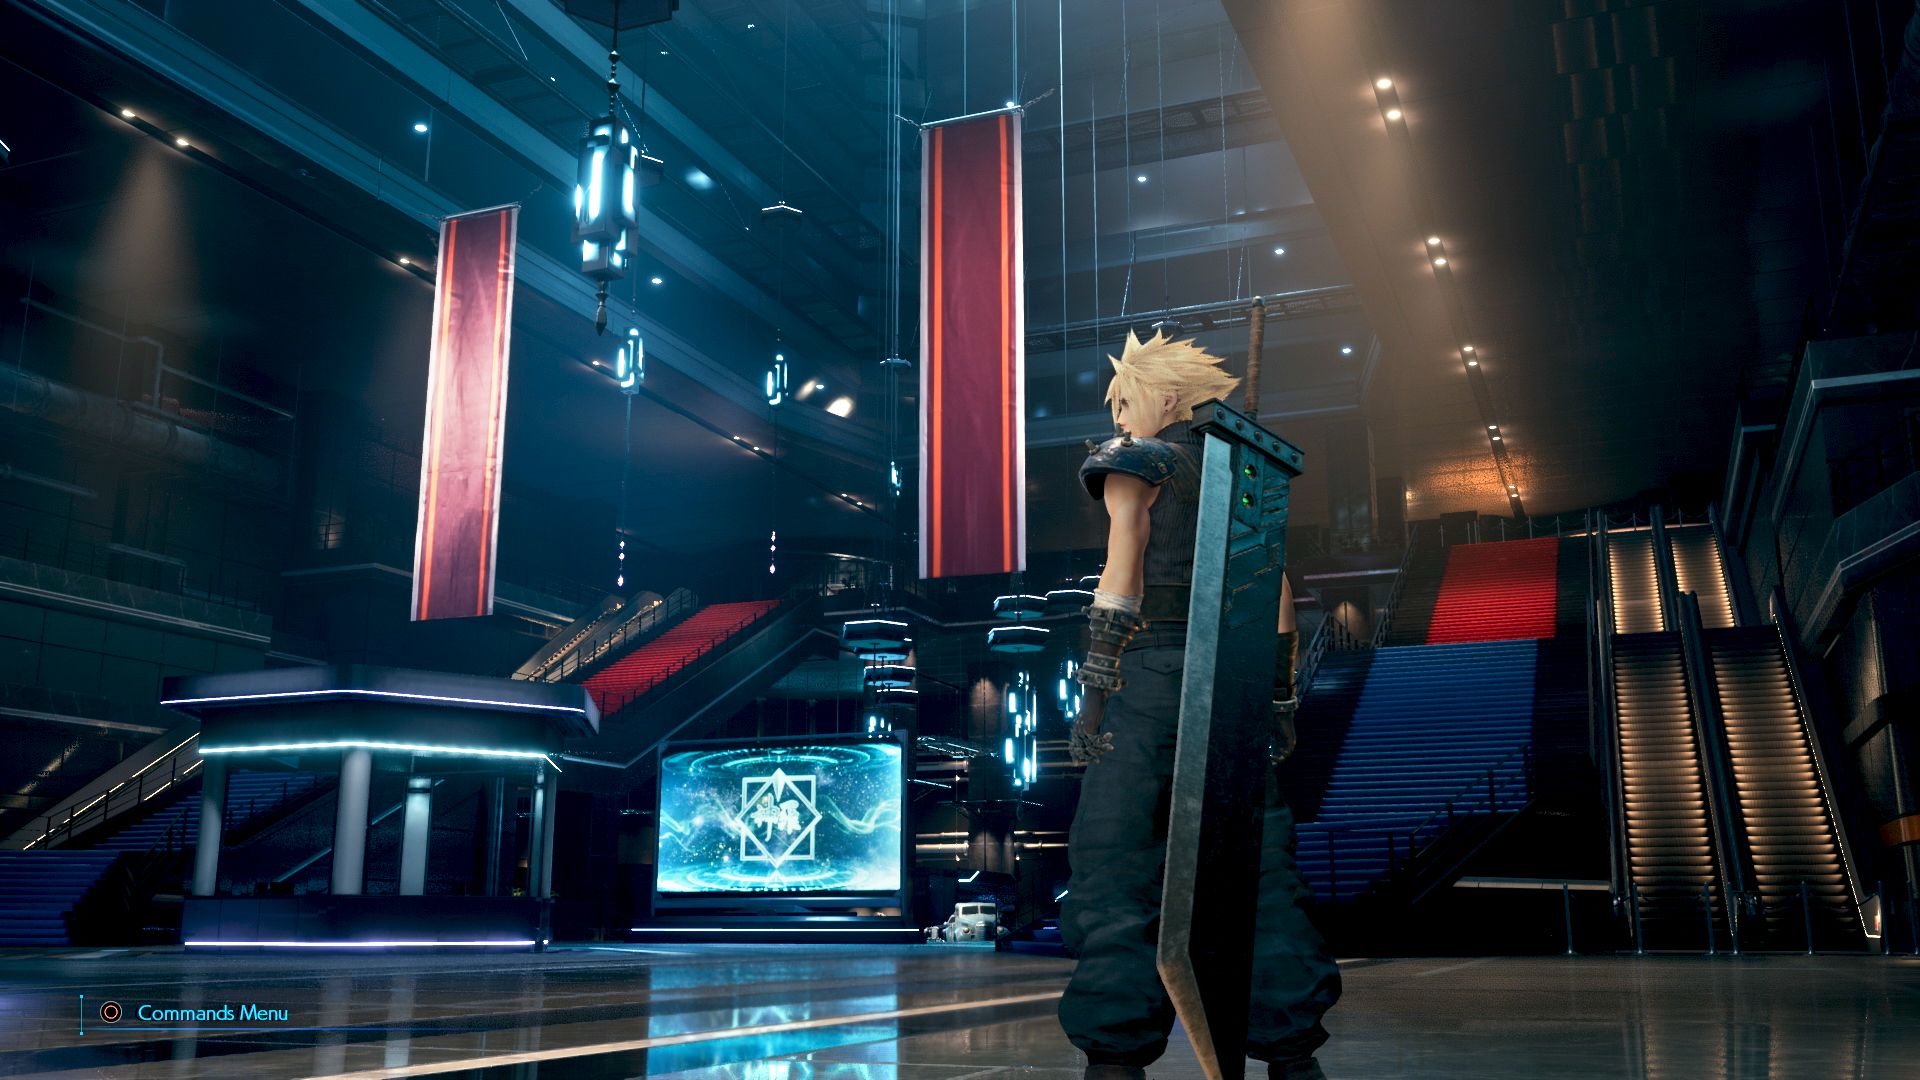 Does Final Fantasy 7 Remake have any appeal to players without nostalgia for the original?